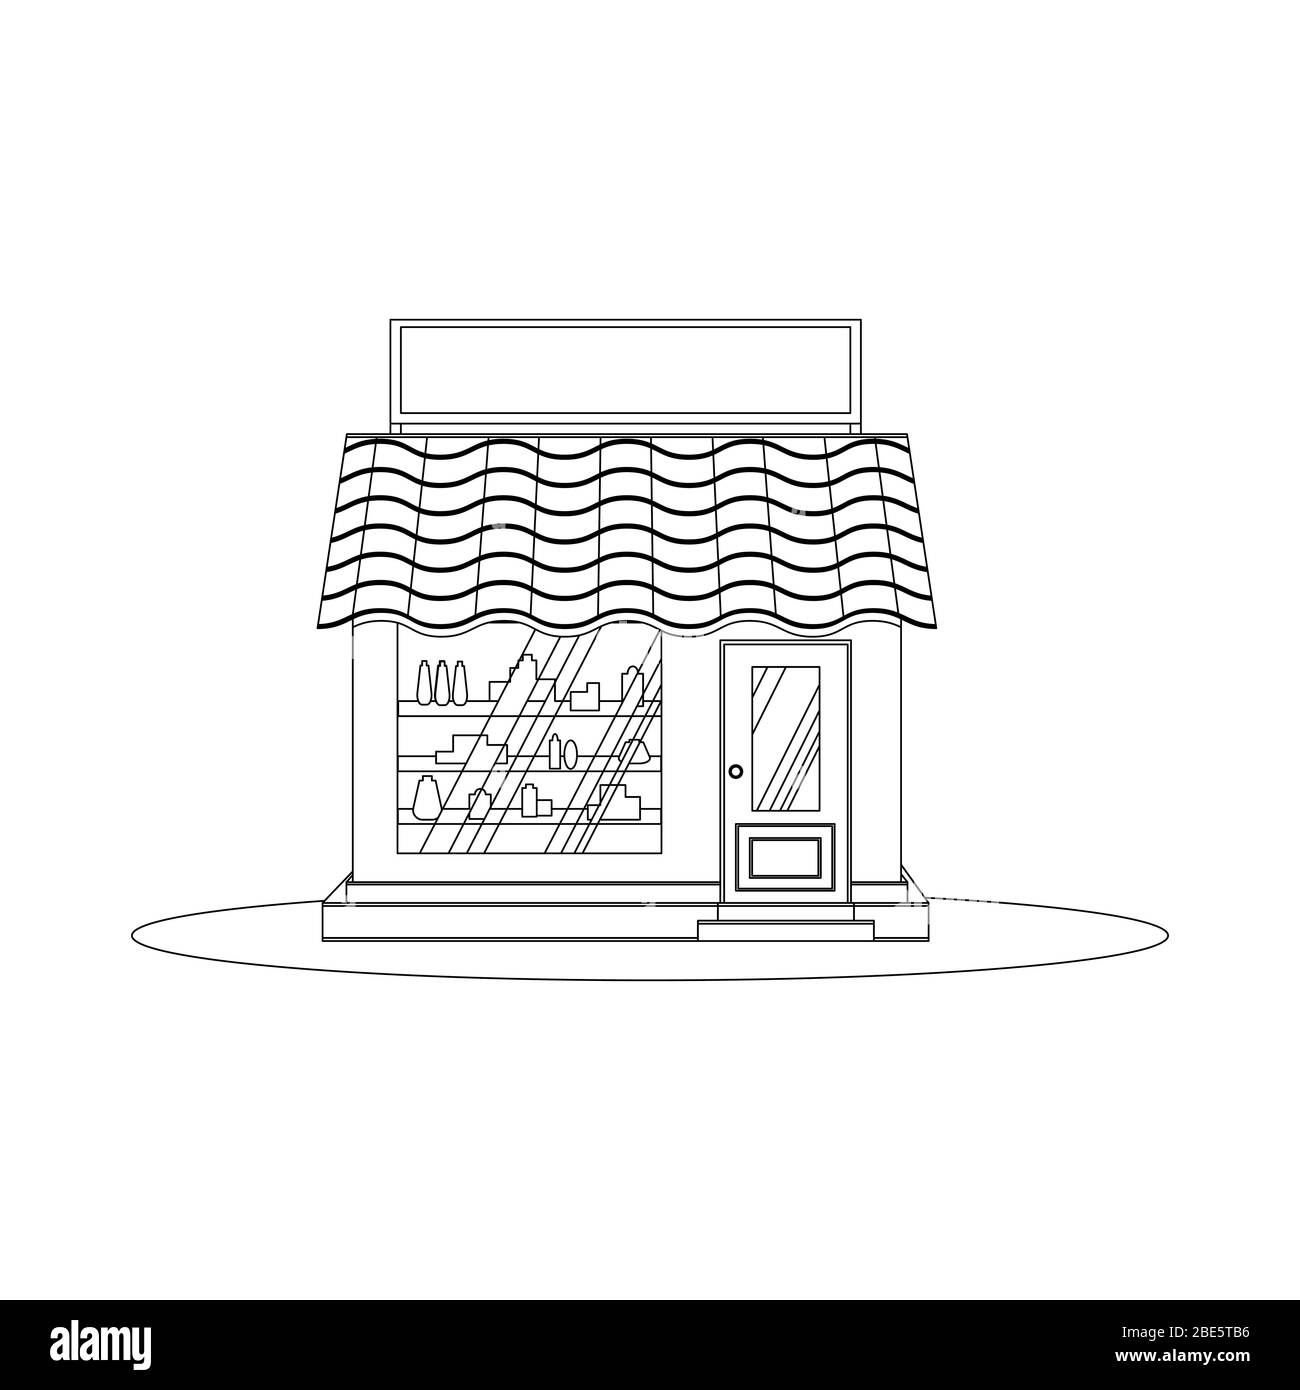 Building facade. A bakery, cafe, pastry shop and a small dessert shop. Market or supermarket. vector illustration. With an awning. Outline, line, icon Stock Vector